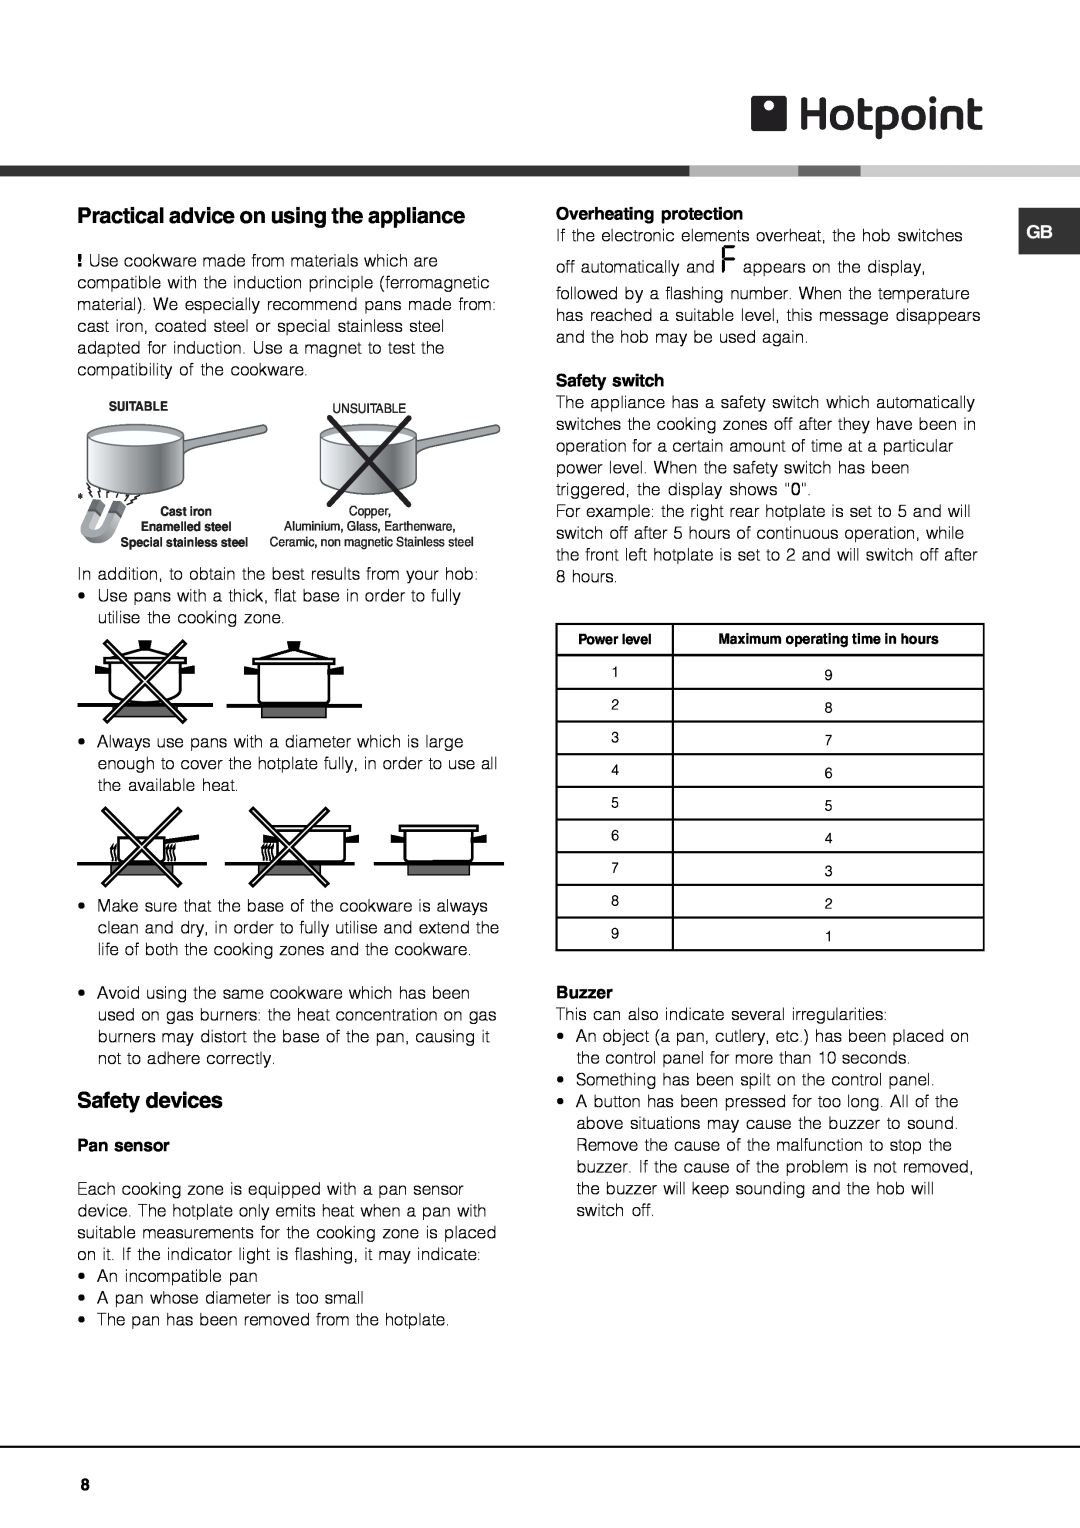 Hotpoint CIA 641 C S Practical advice on using the appliance, Safety devices, Pan sensor, Overheating protection, Buzzer 